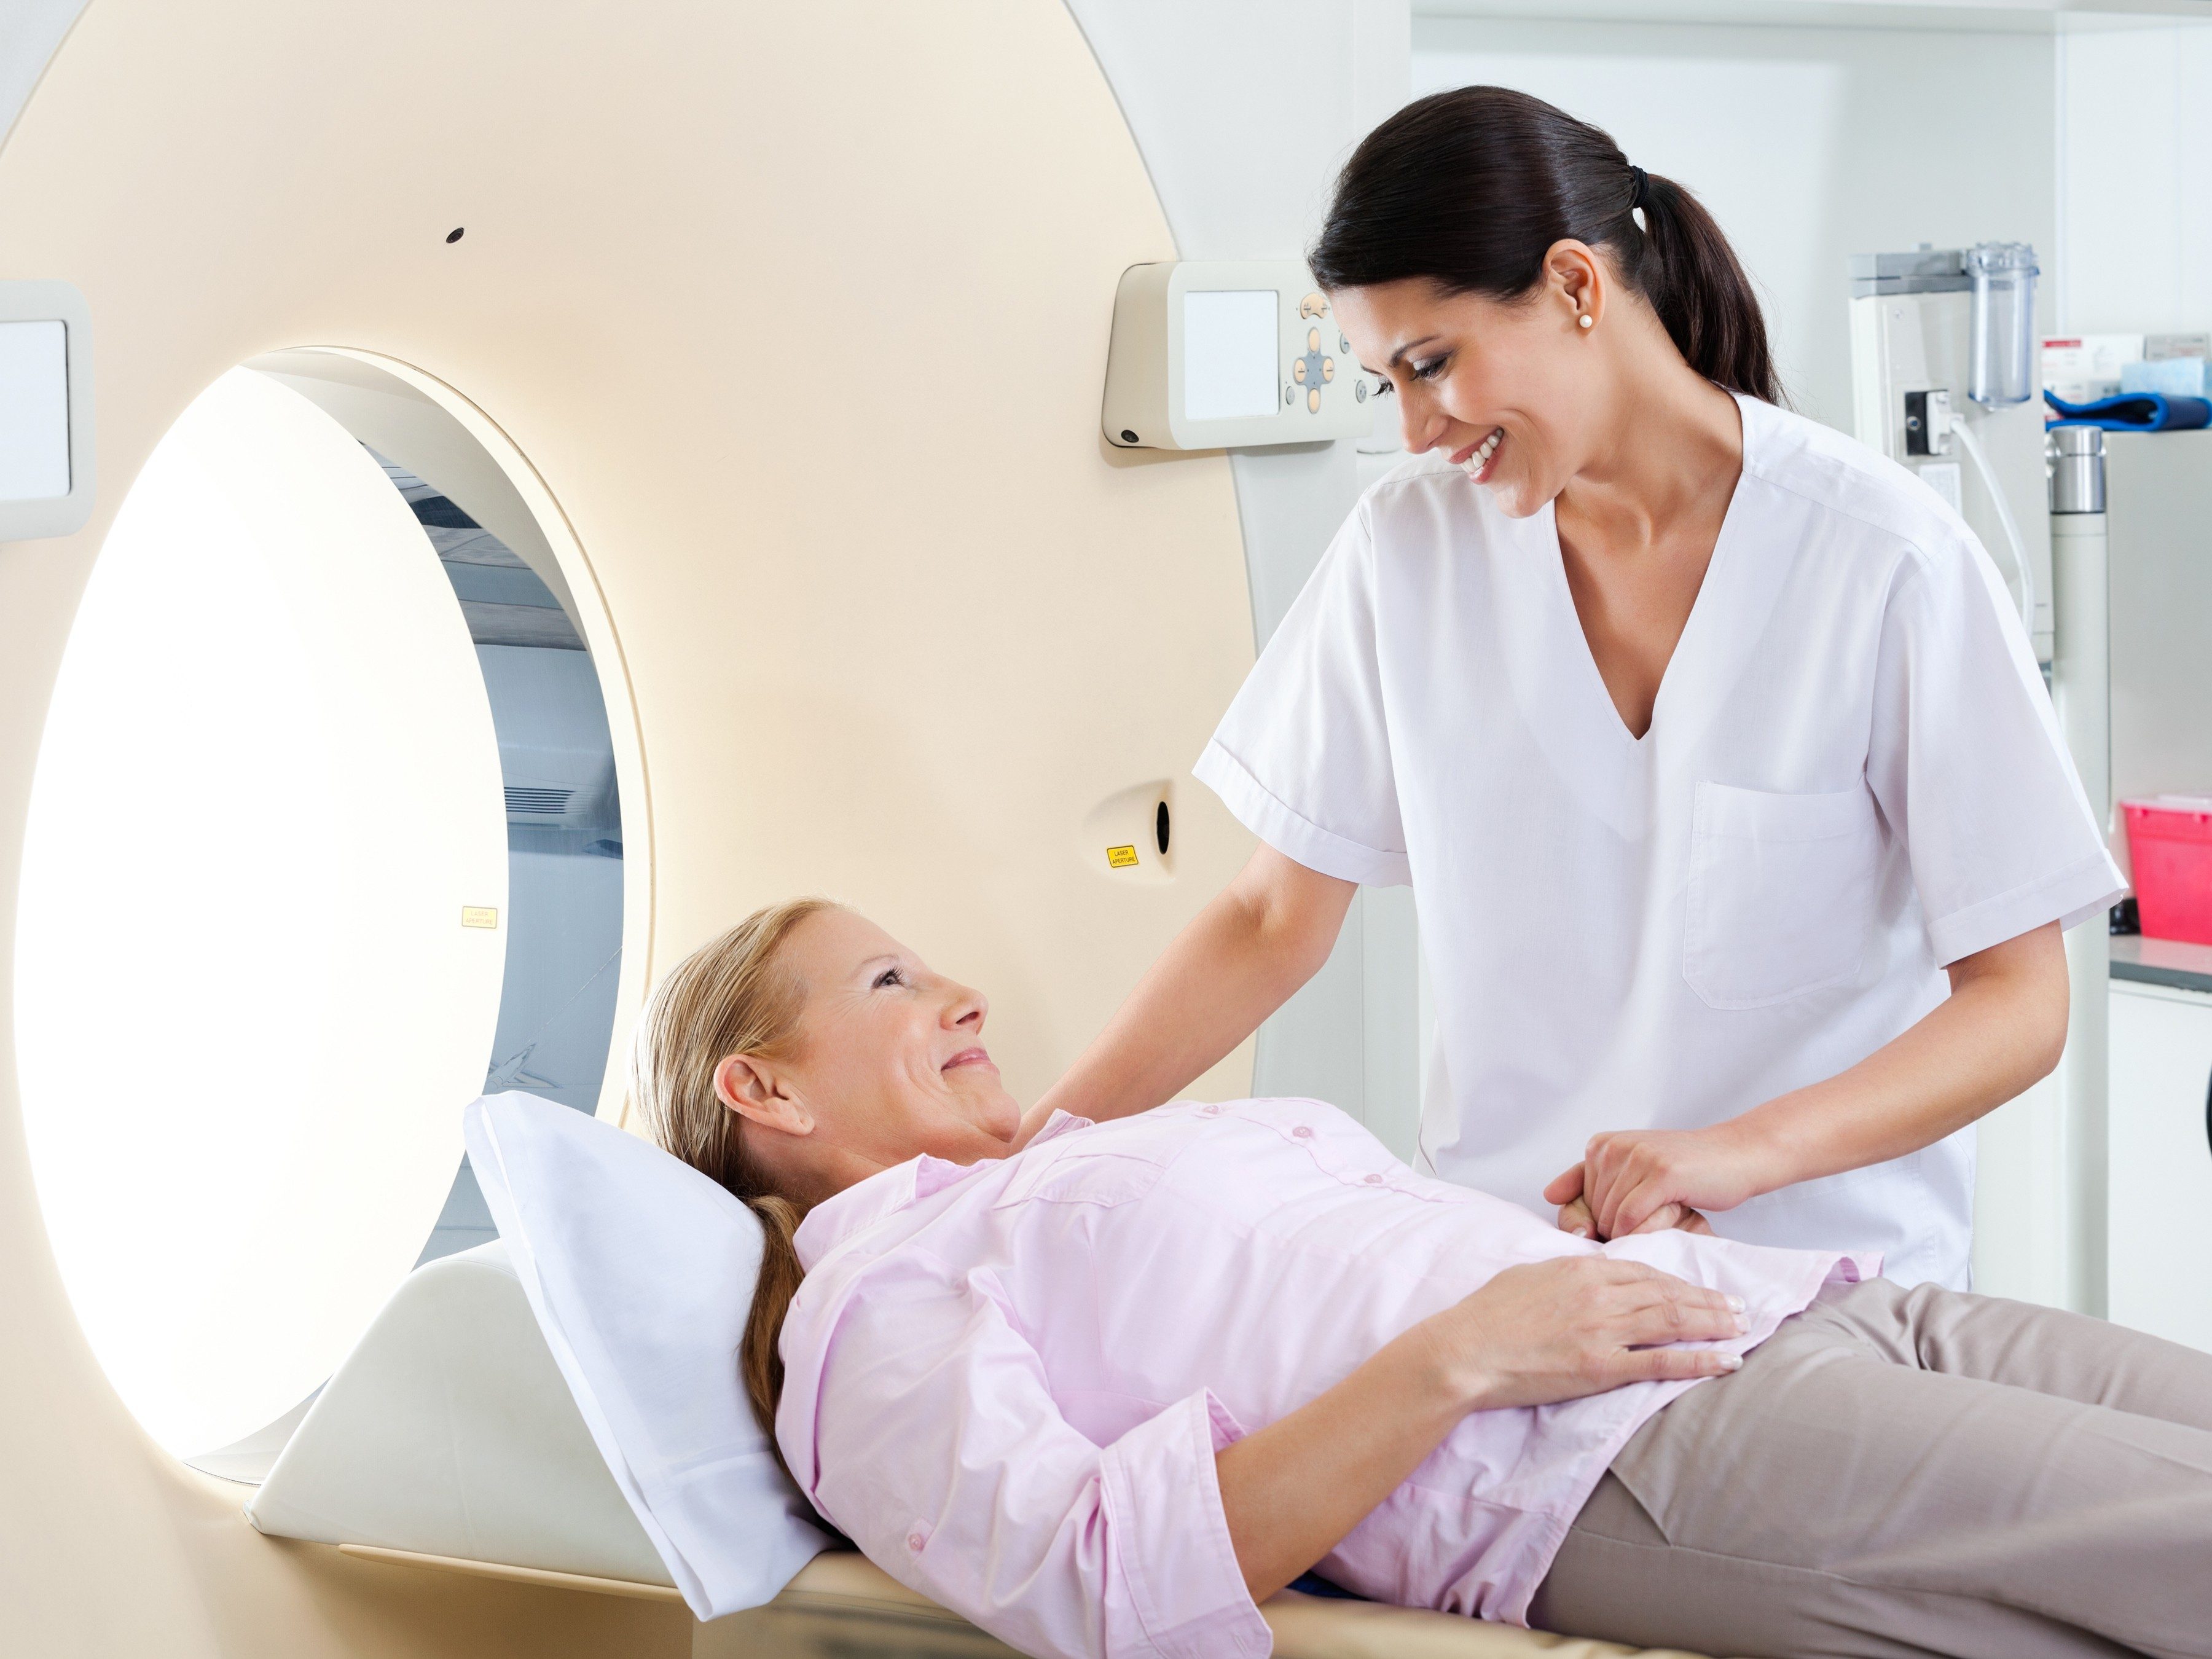 MRIs for Low-Back Pain